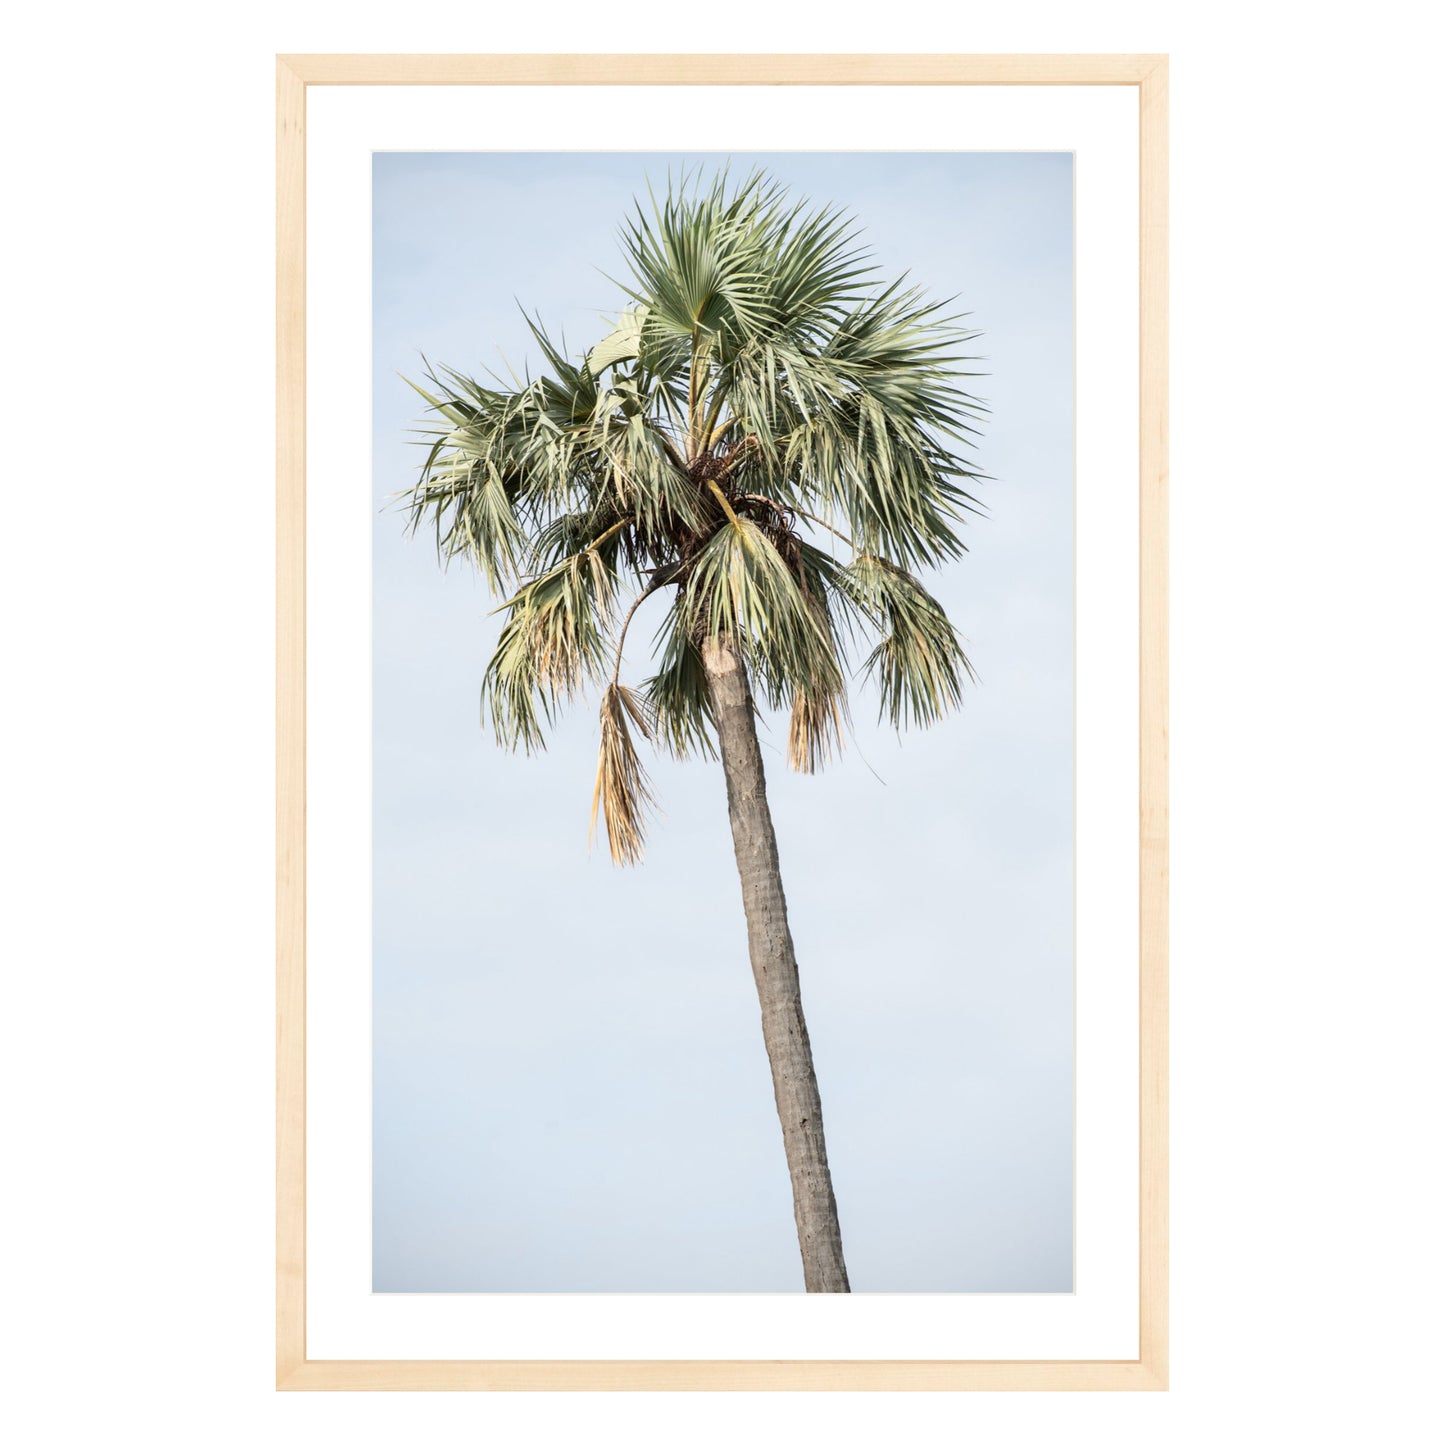 Photograph of a palm tree in Tanzania, framed in natural wood with white mat